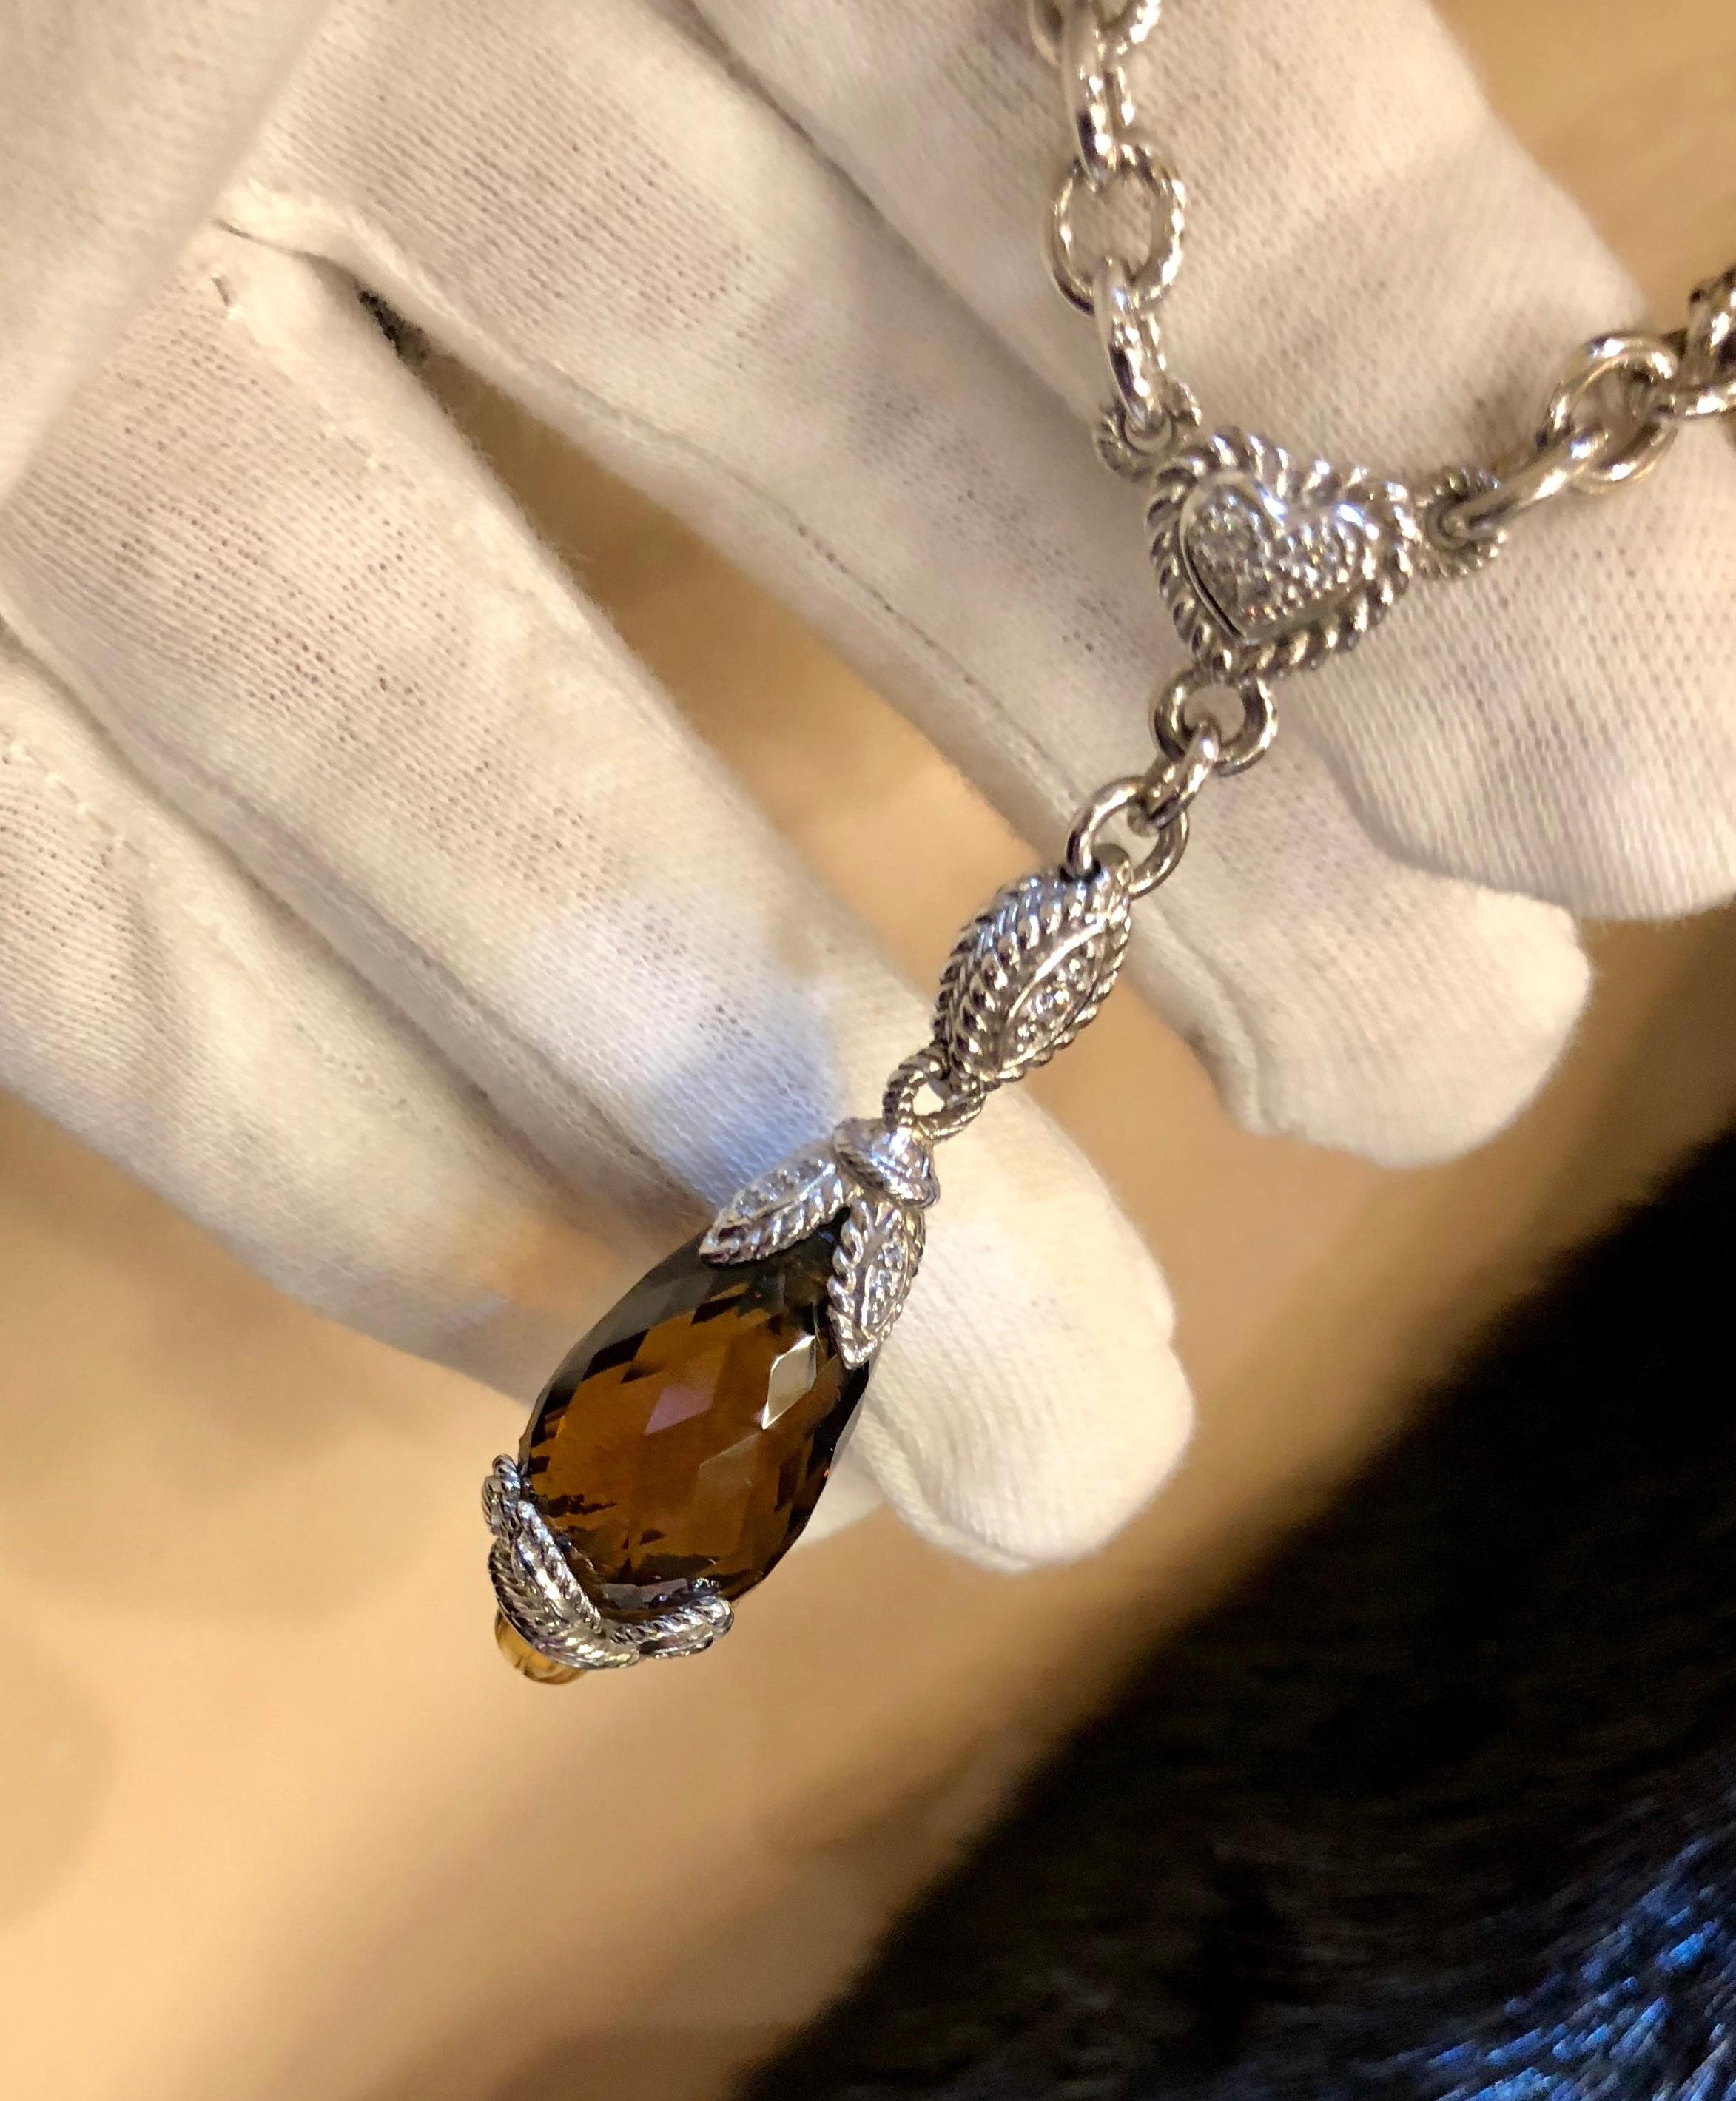 Fashionable necklace from Beverly Hills Rodeo Drive designer, Judith Ripka, features a gorgeous, large pineapple cut smoky topaz stone, suspended by an elaborate, diamond pave embellished sterling silver bale and chain with a leaf and heart motif,